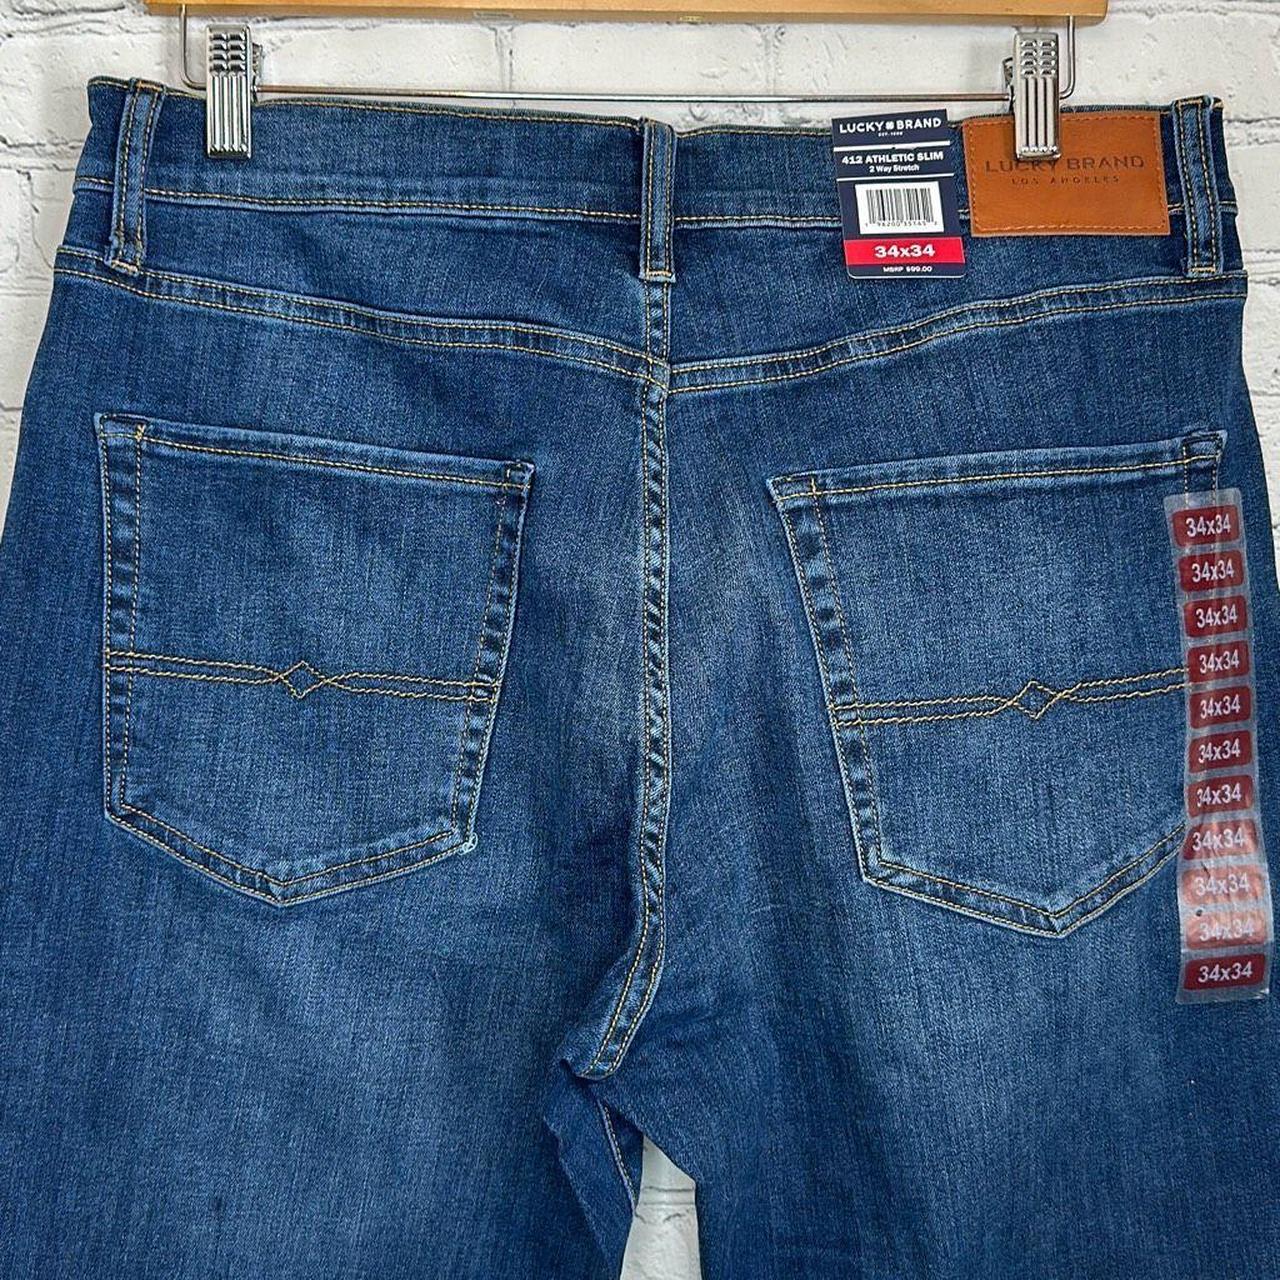 Lucky Brand Men's 412 Athletic Slim 2 Way and 19 similar items